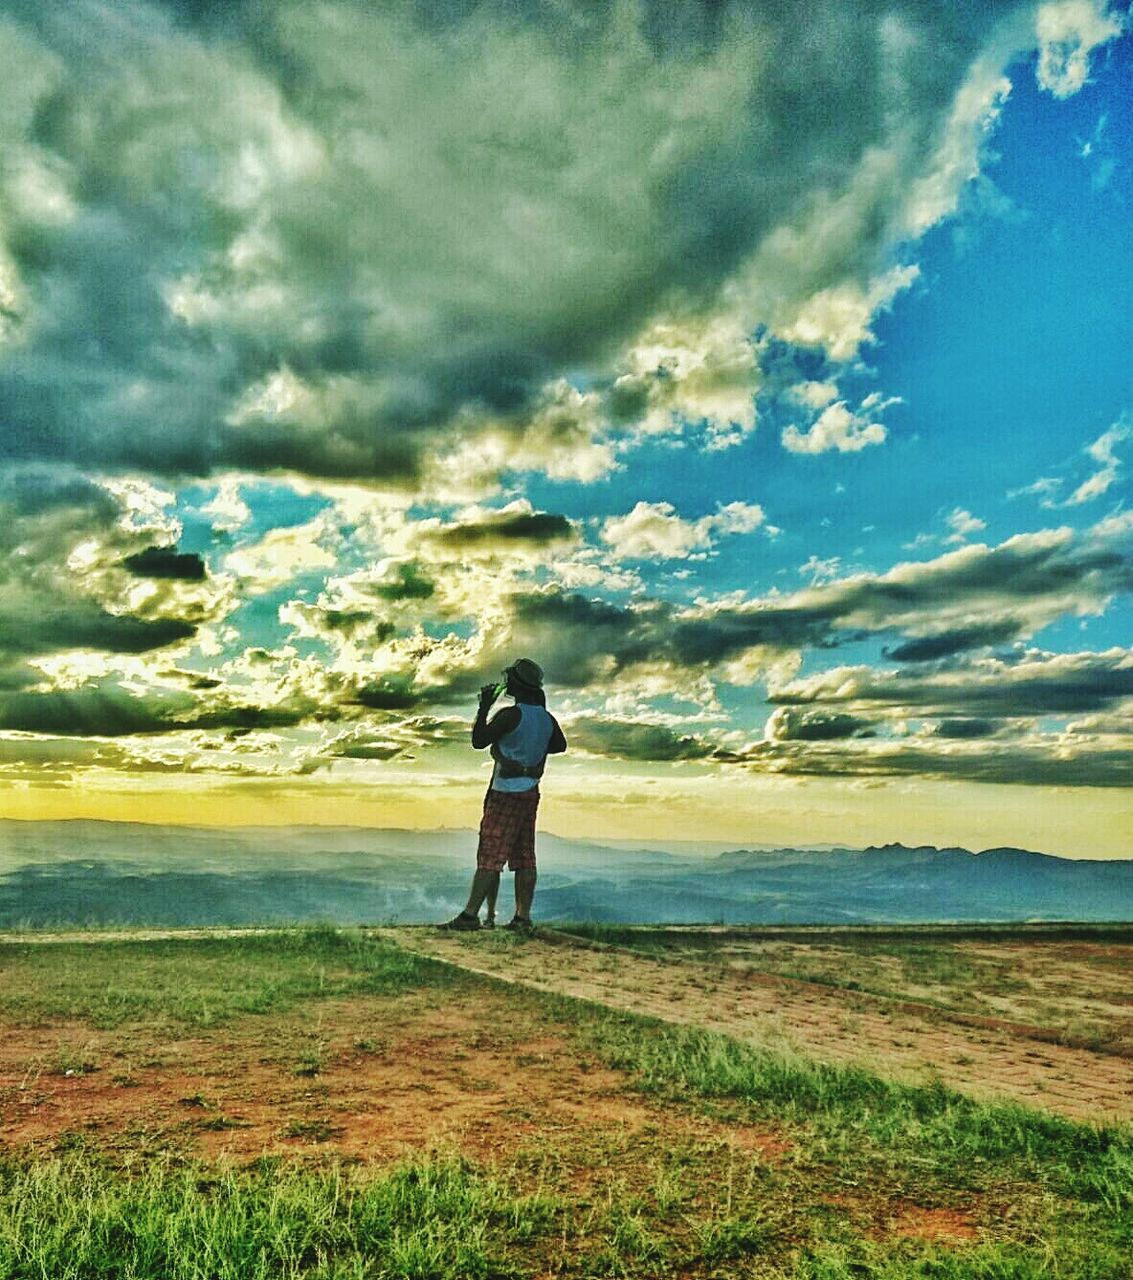 sky, rear view, full length, cloud - sky, standing, grass, tranquility, lifestyles, landscape, leisure activity, field, tranquil scene, cloud, nature, cloudy, beauty in nature, casual clothing, scenics